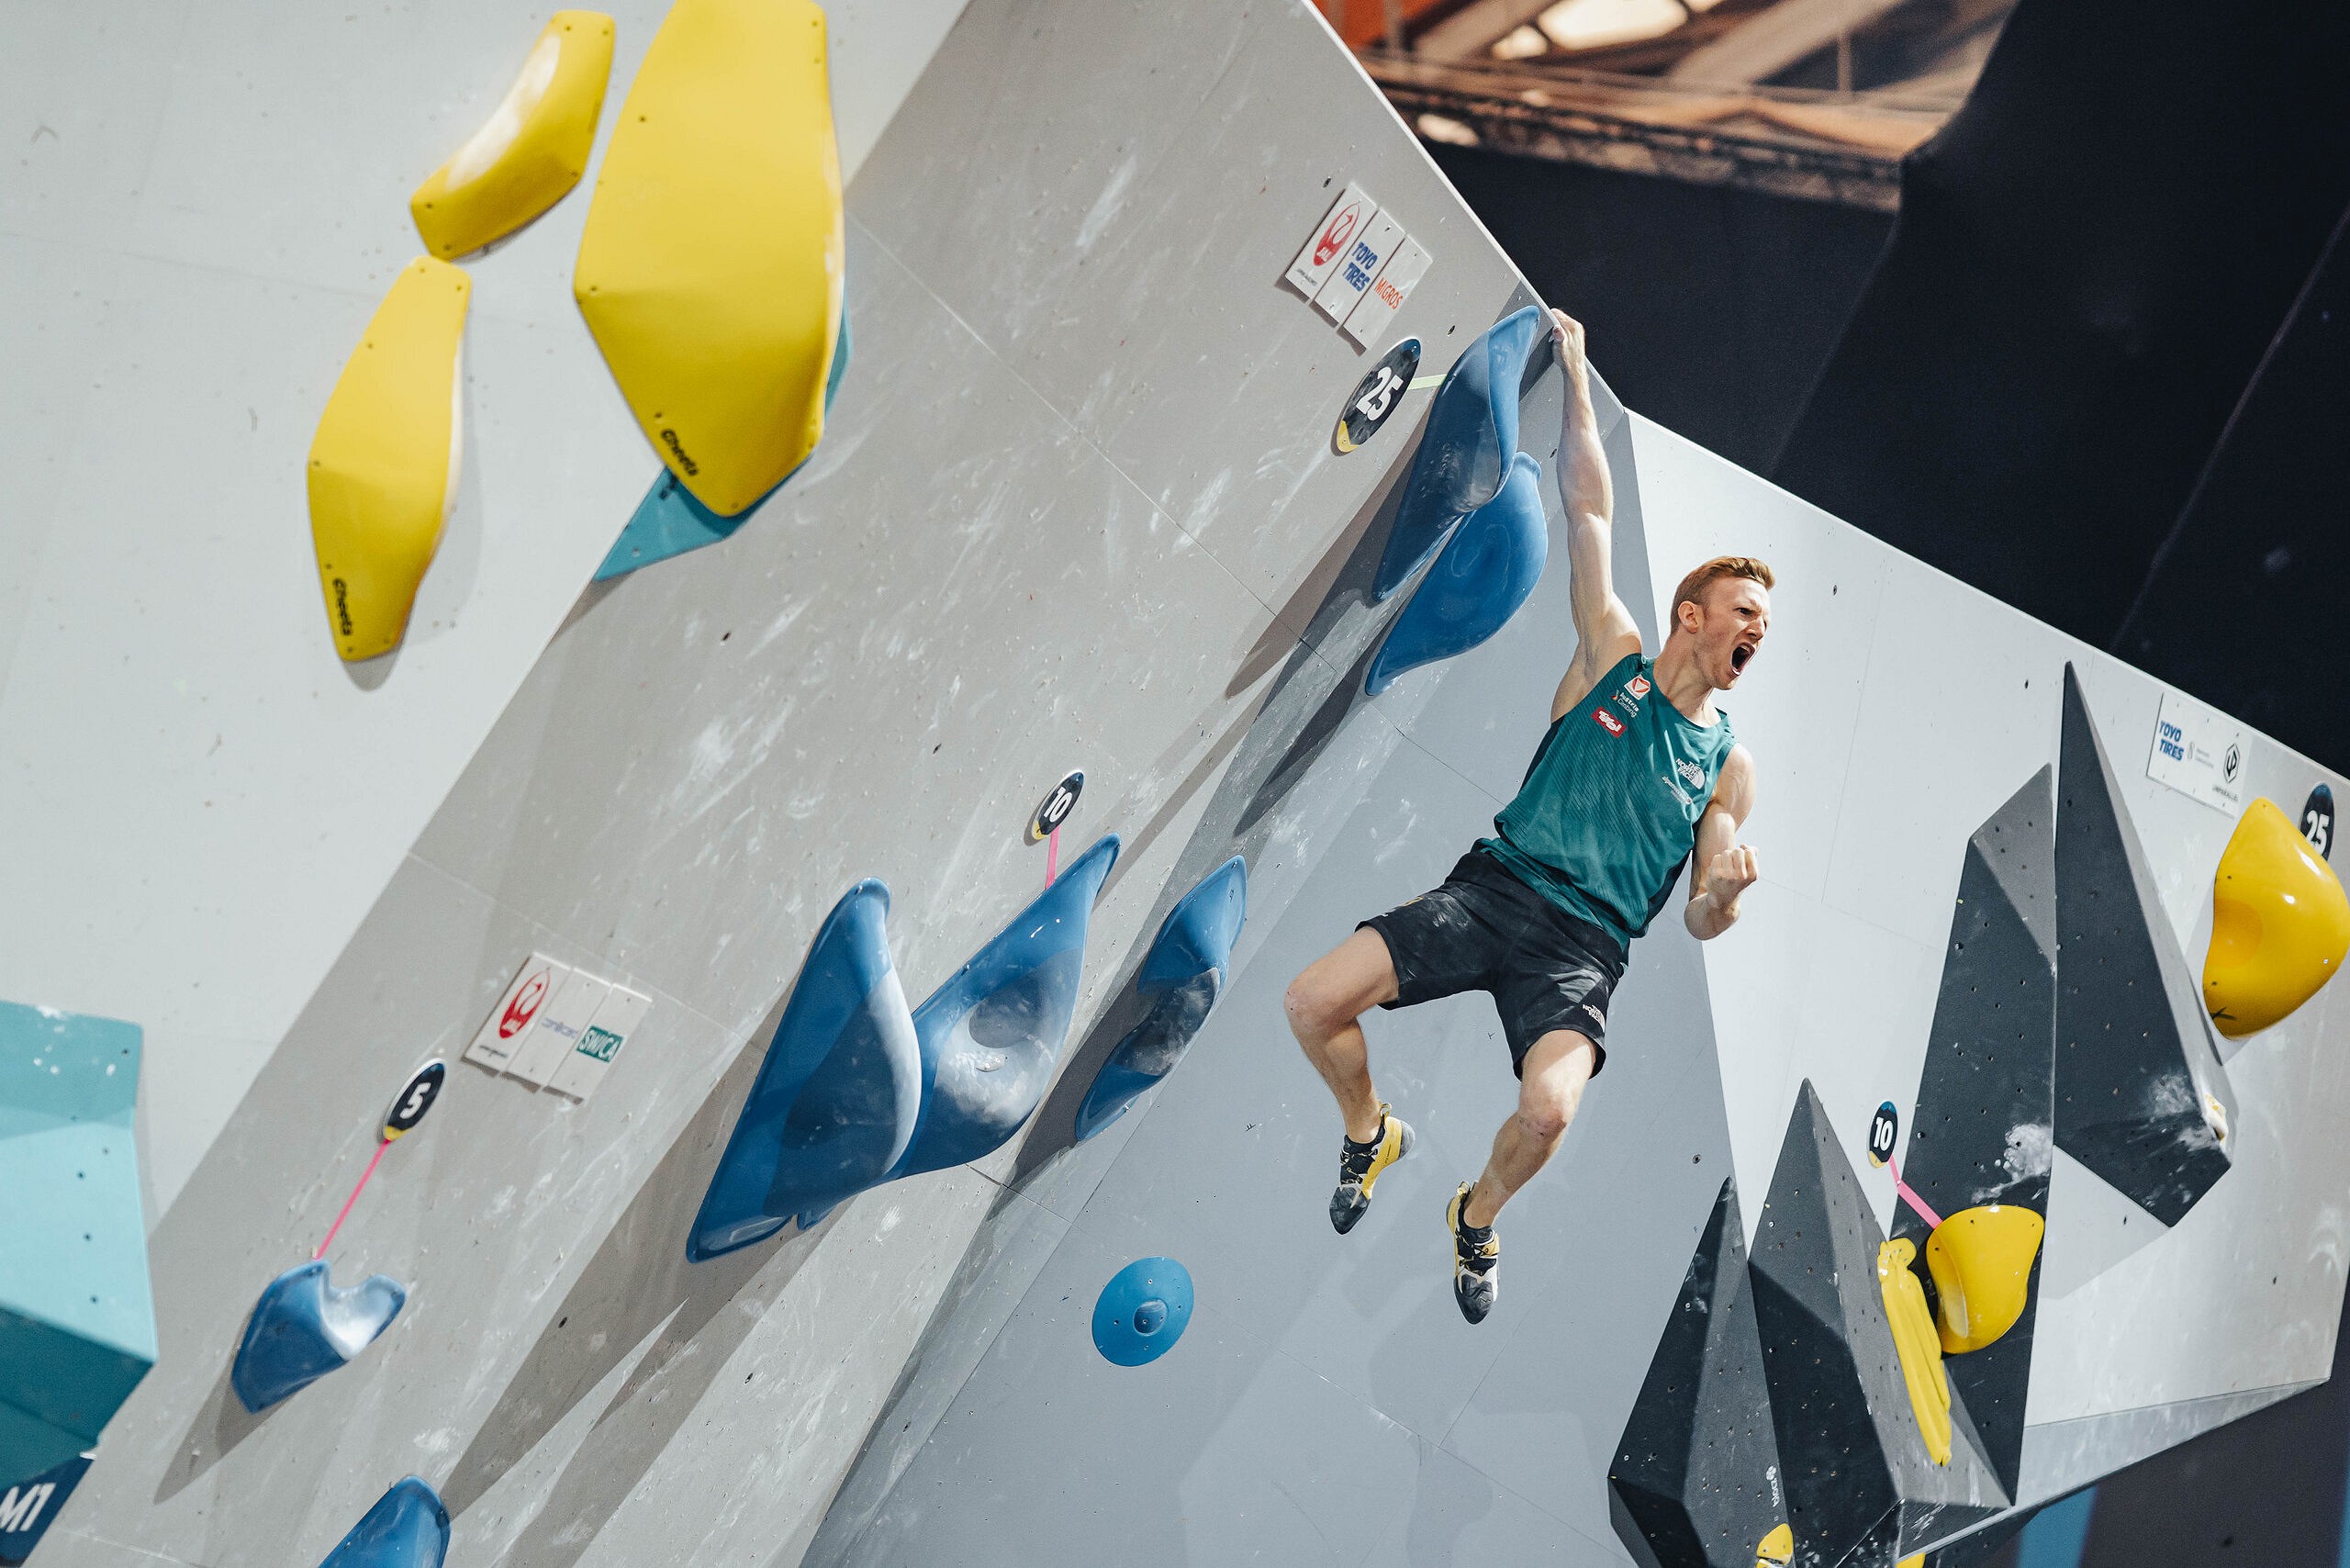 Jakob Schubert's solid Boulder performance helped him to relax in the Lead round to take the win.  © Lena Drapella/IFSC